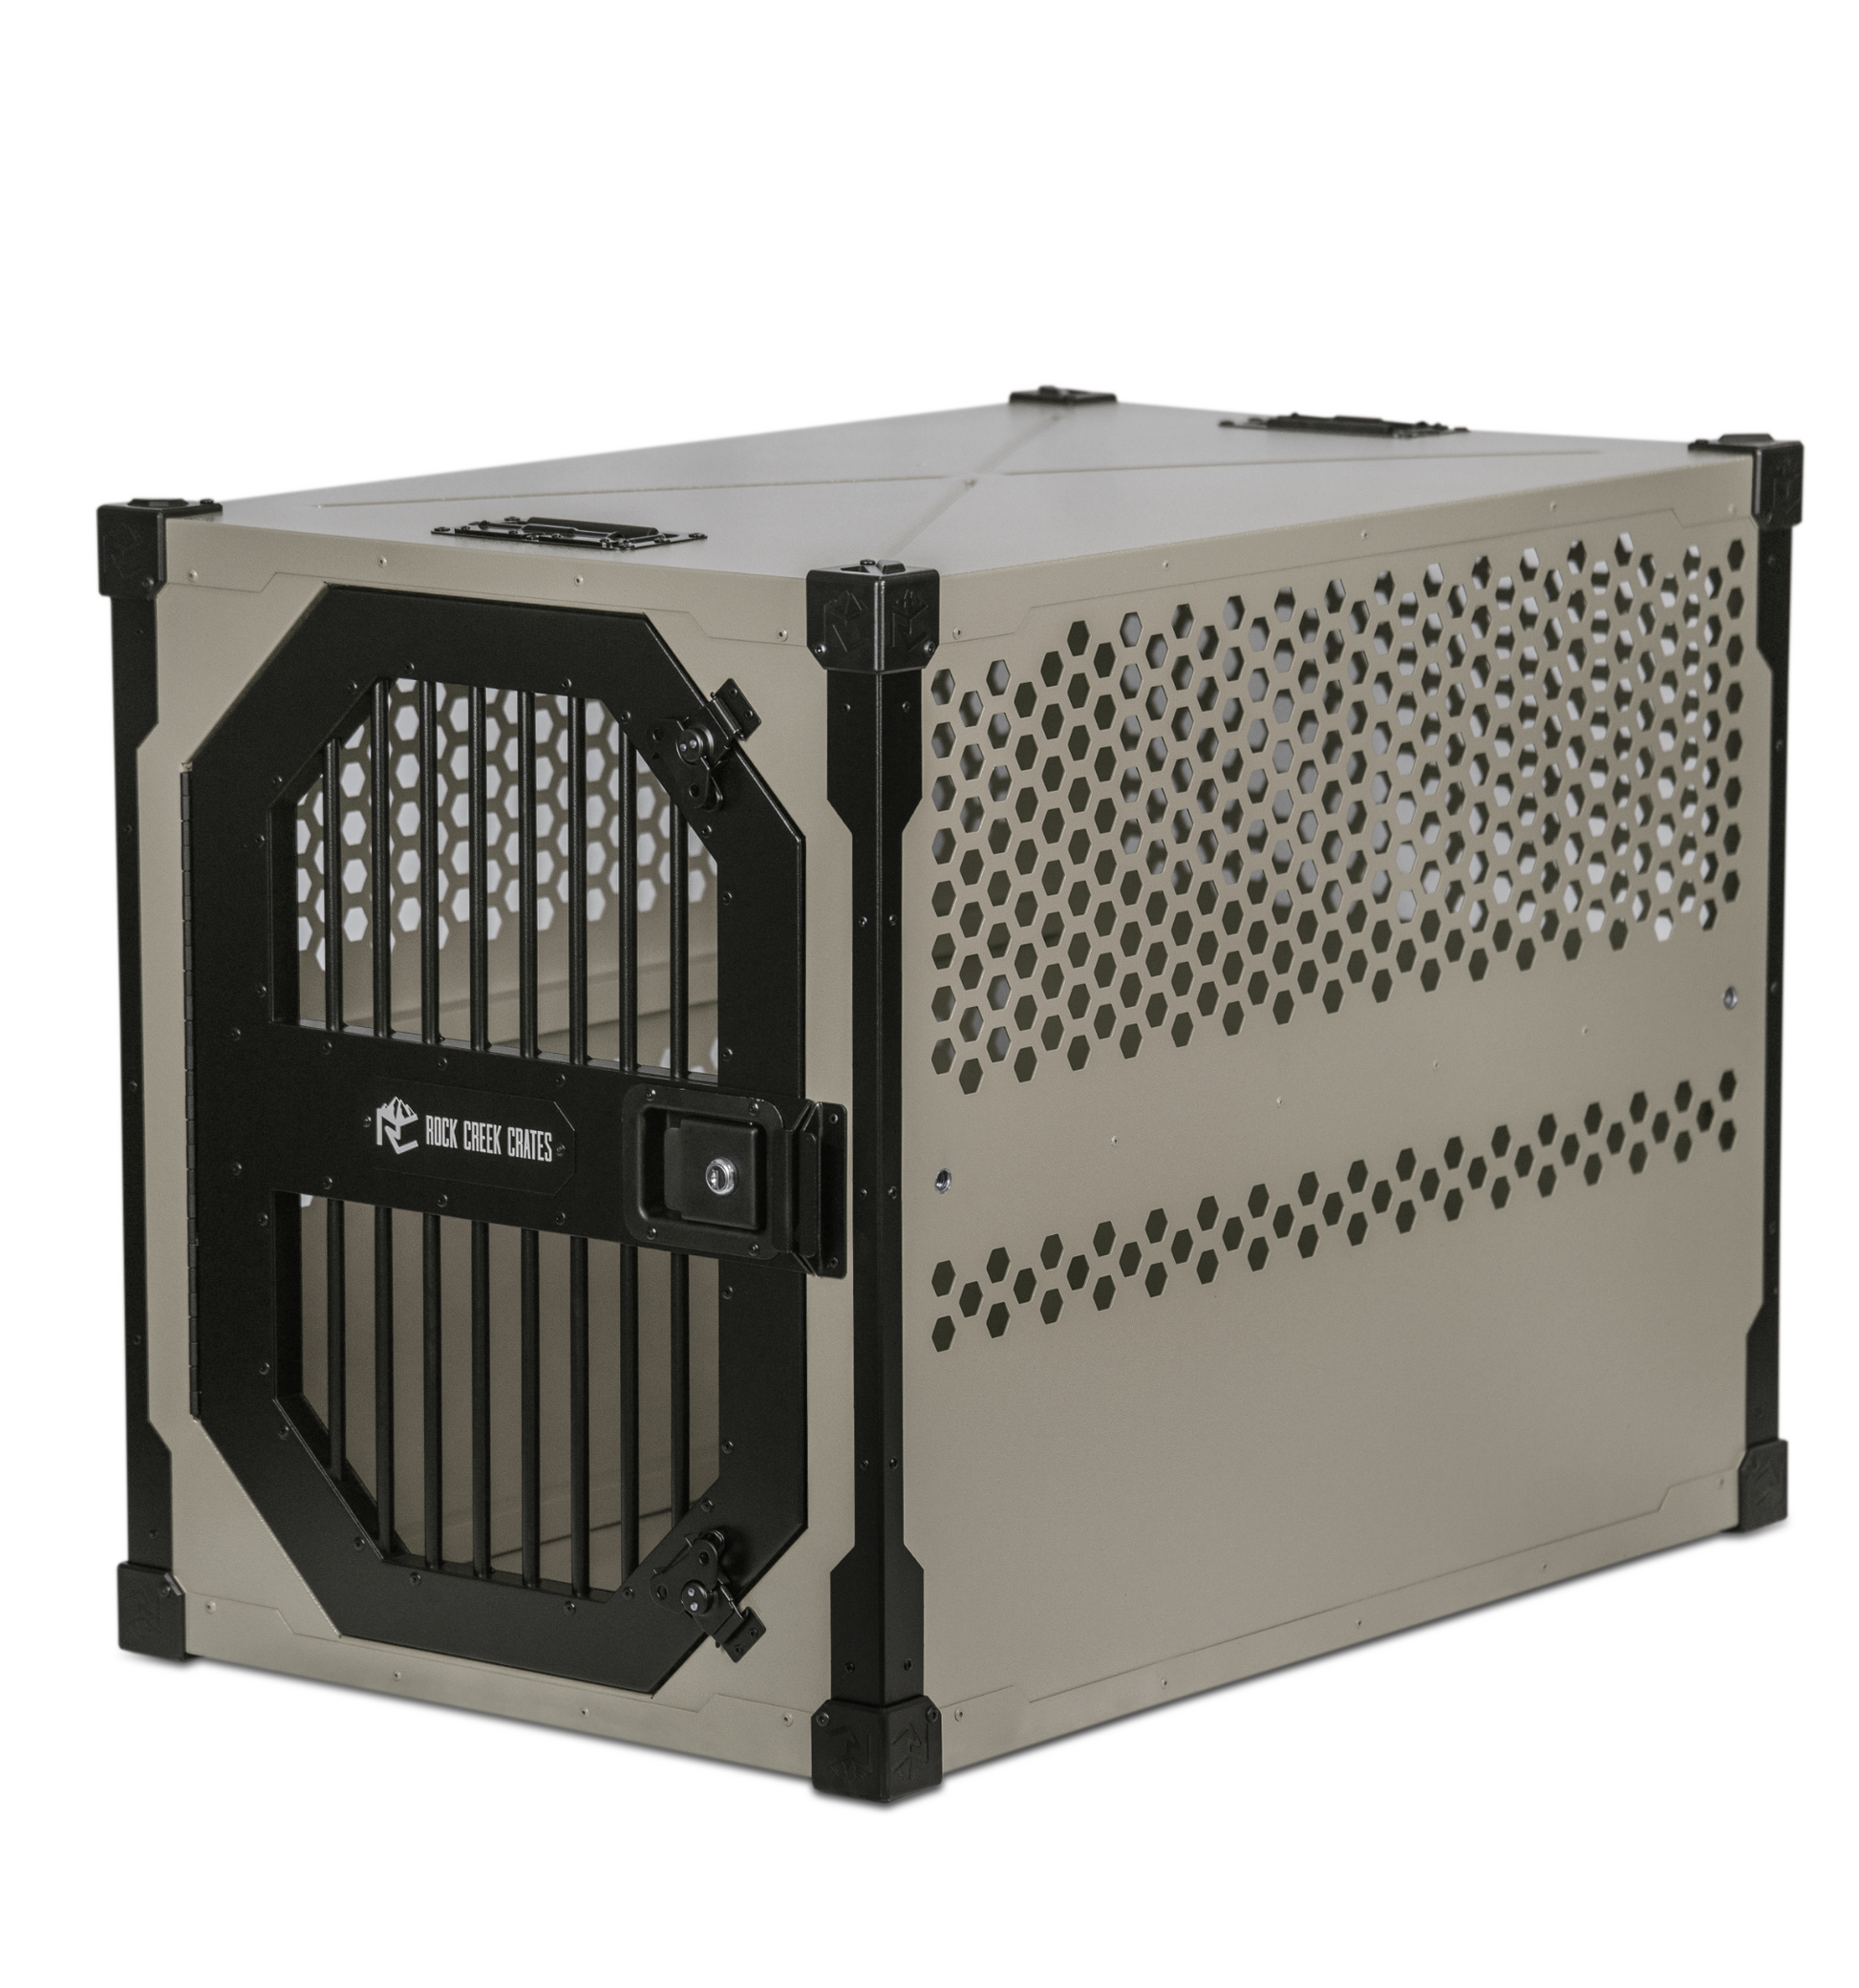 Grey Stationary dog crate by Rock Creek Crates